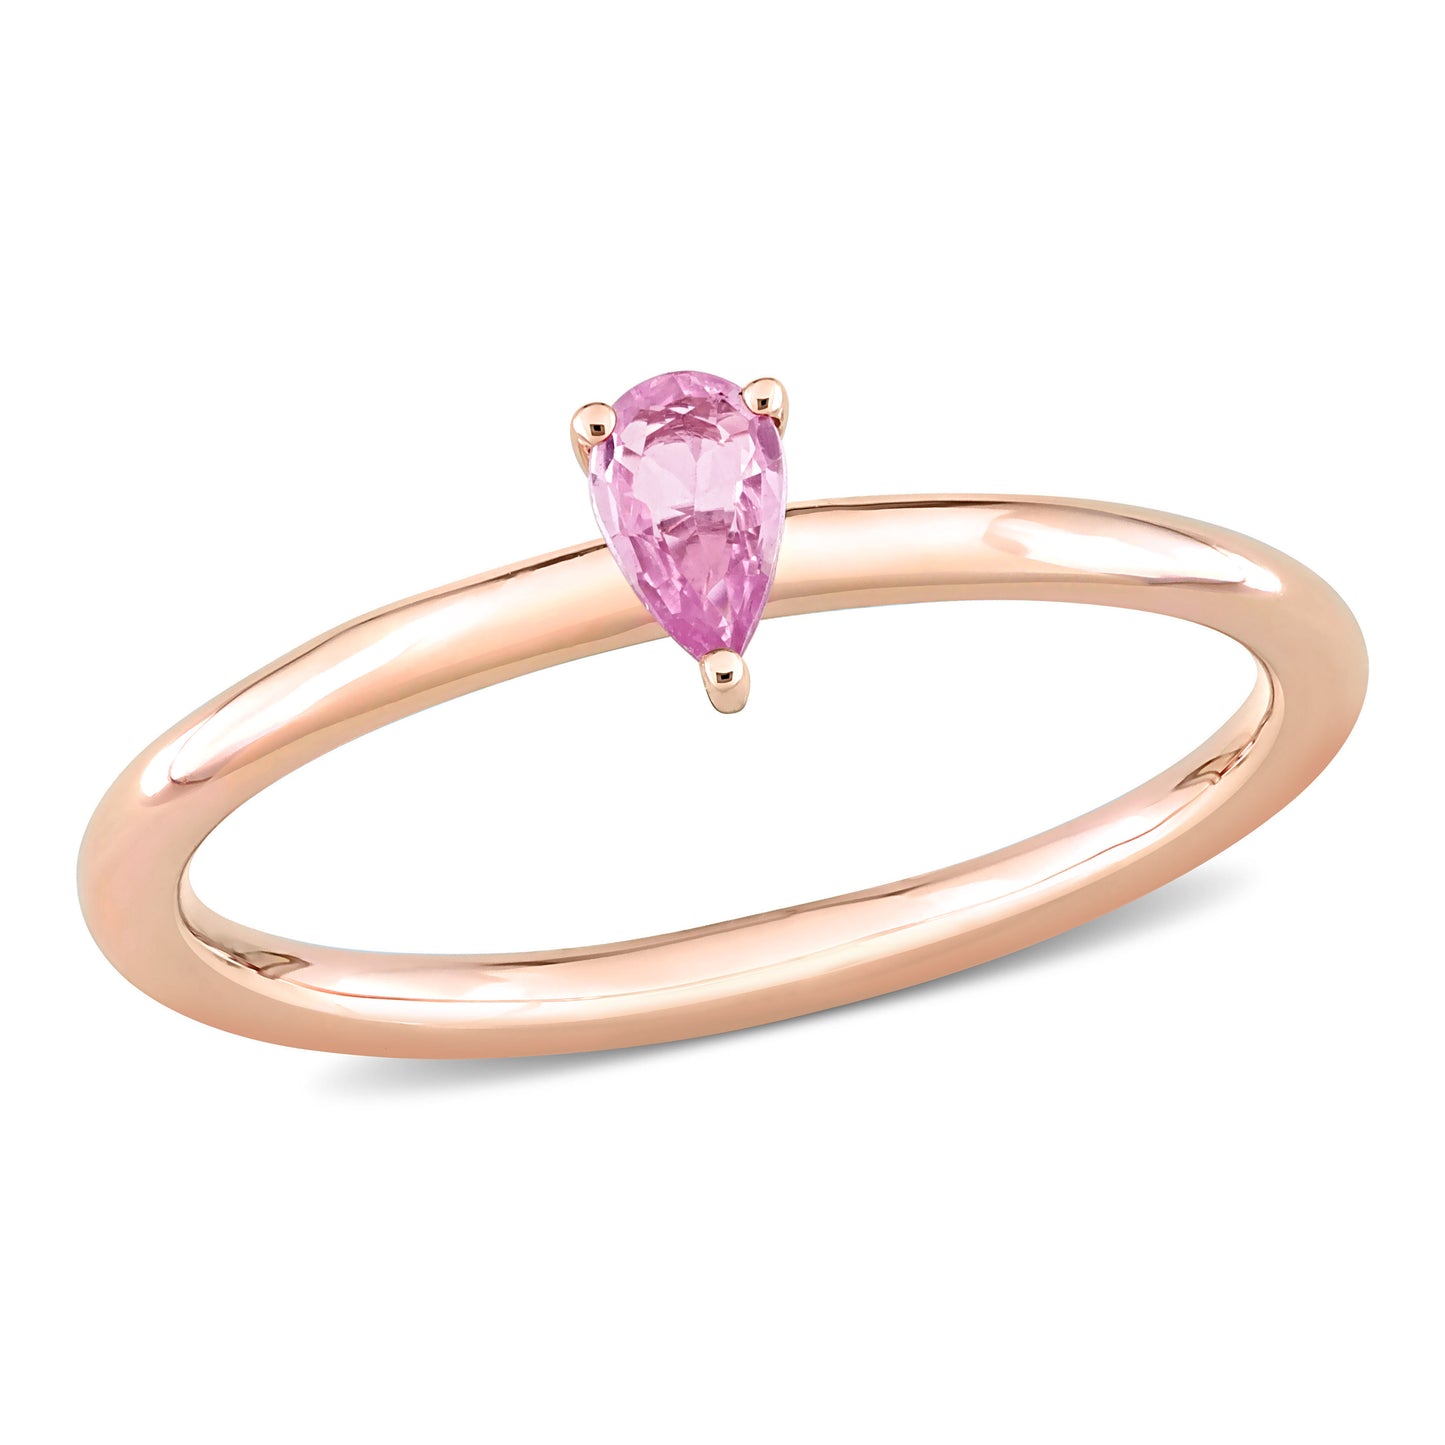 1/4ct Pear Cut Pink Sapphire Ring in 10k Rose Gold